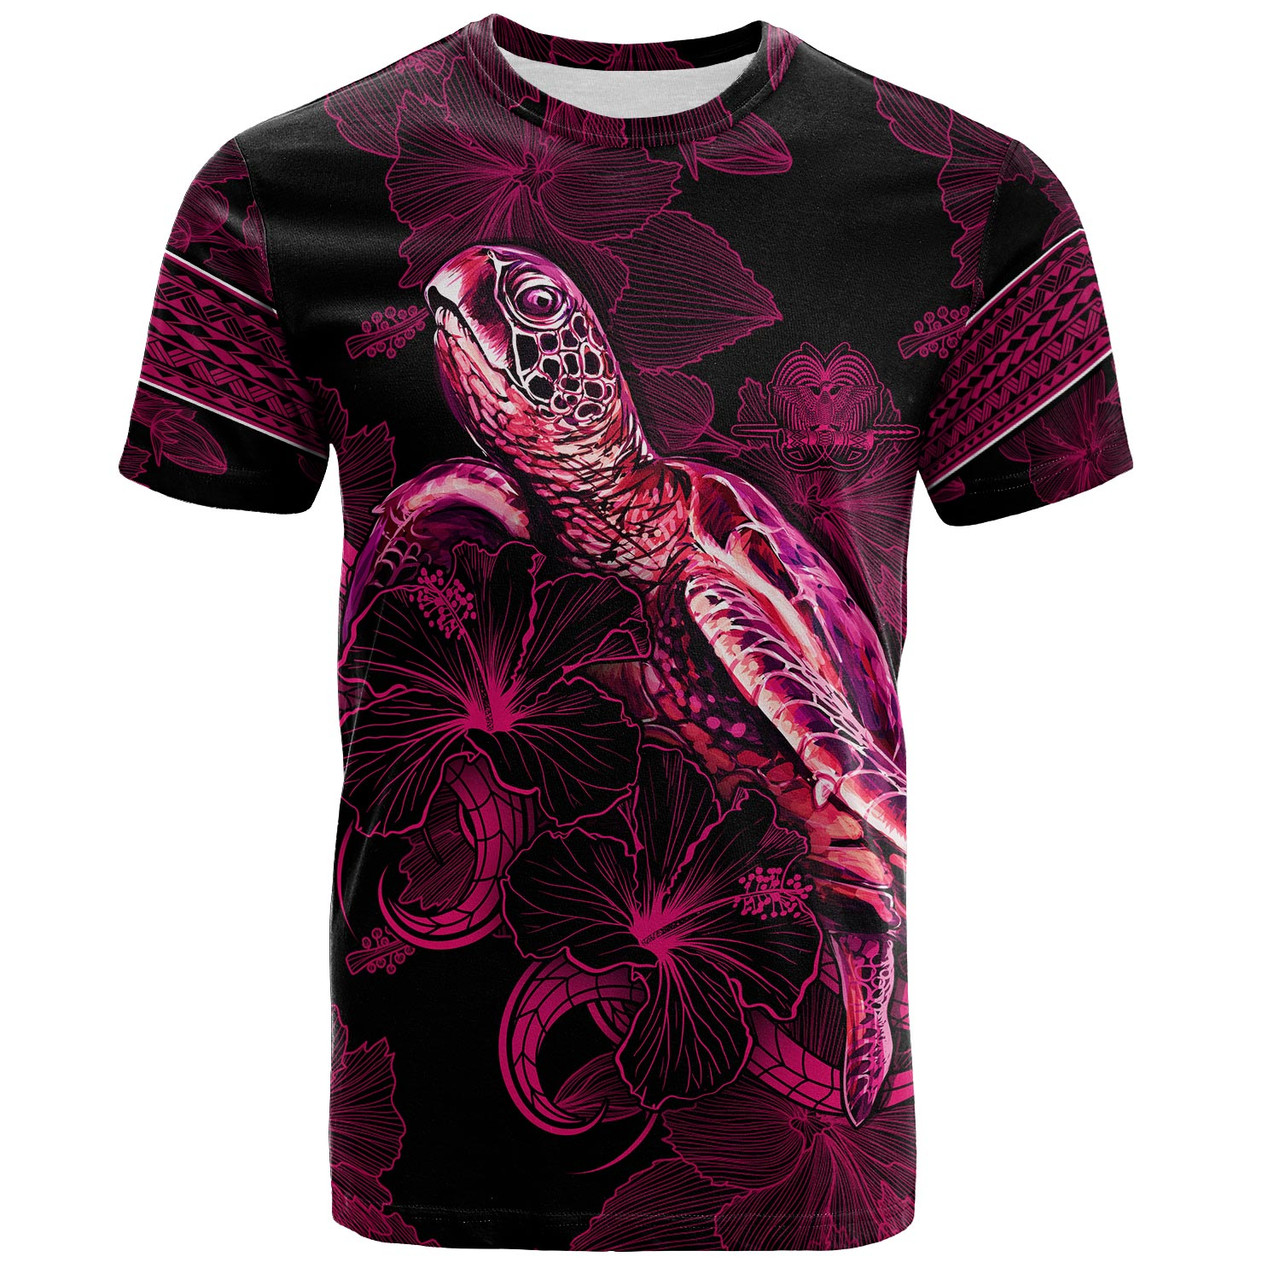 Papua New Guinea T-Shirt Sea Turtle With Blooming Hibiscus Flowers Tribal Maroon